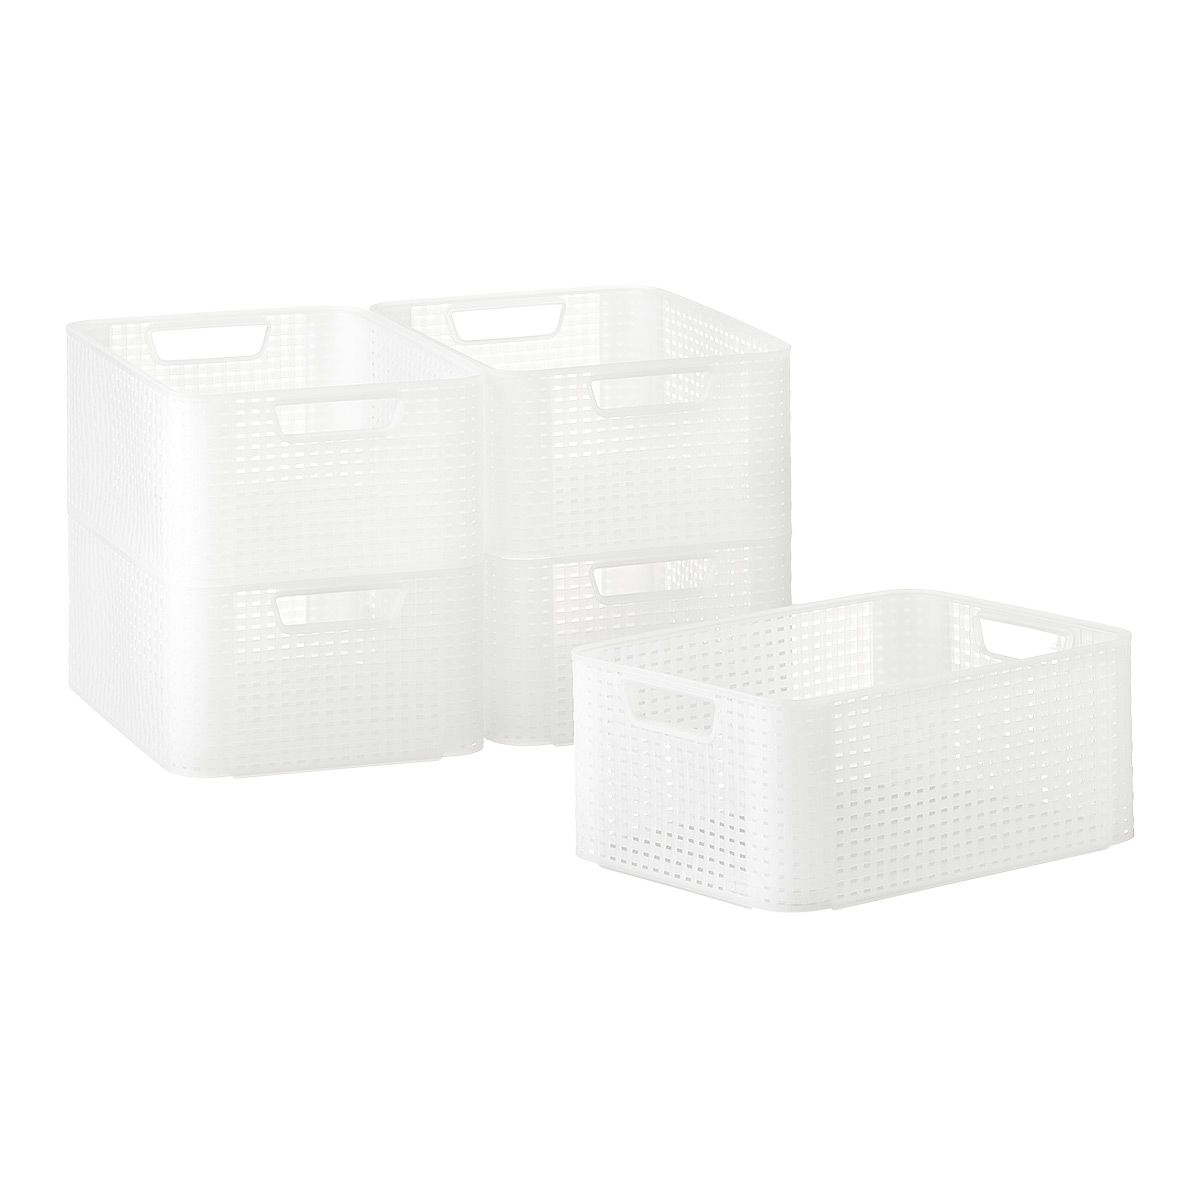 Case of 5 Medium Basketweave | The Container Store